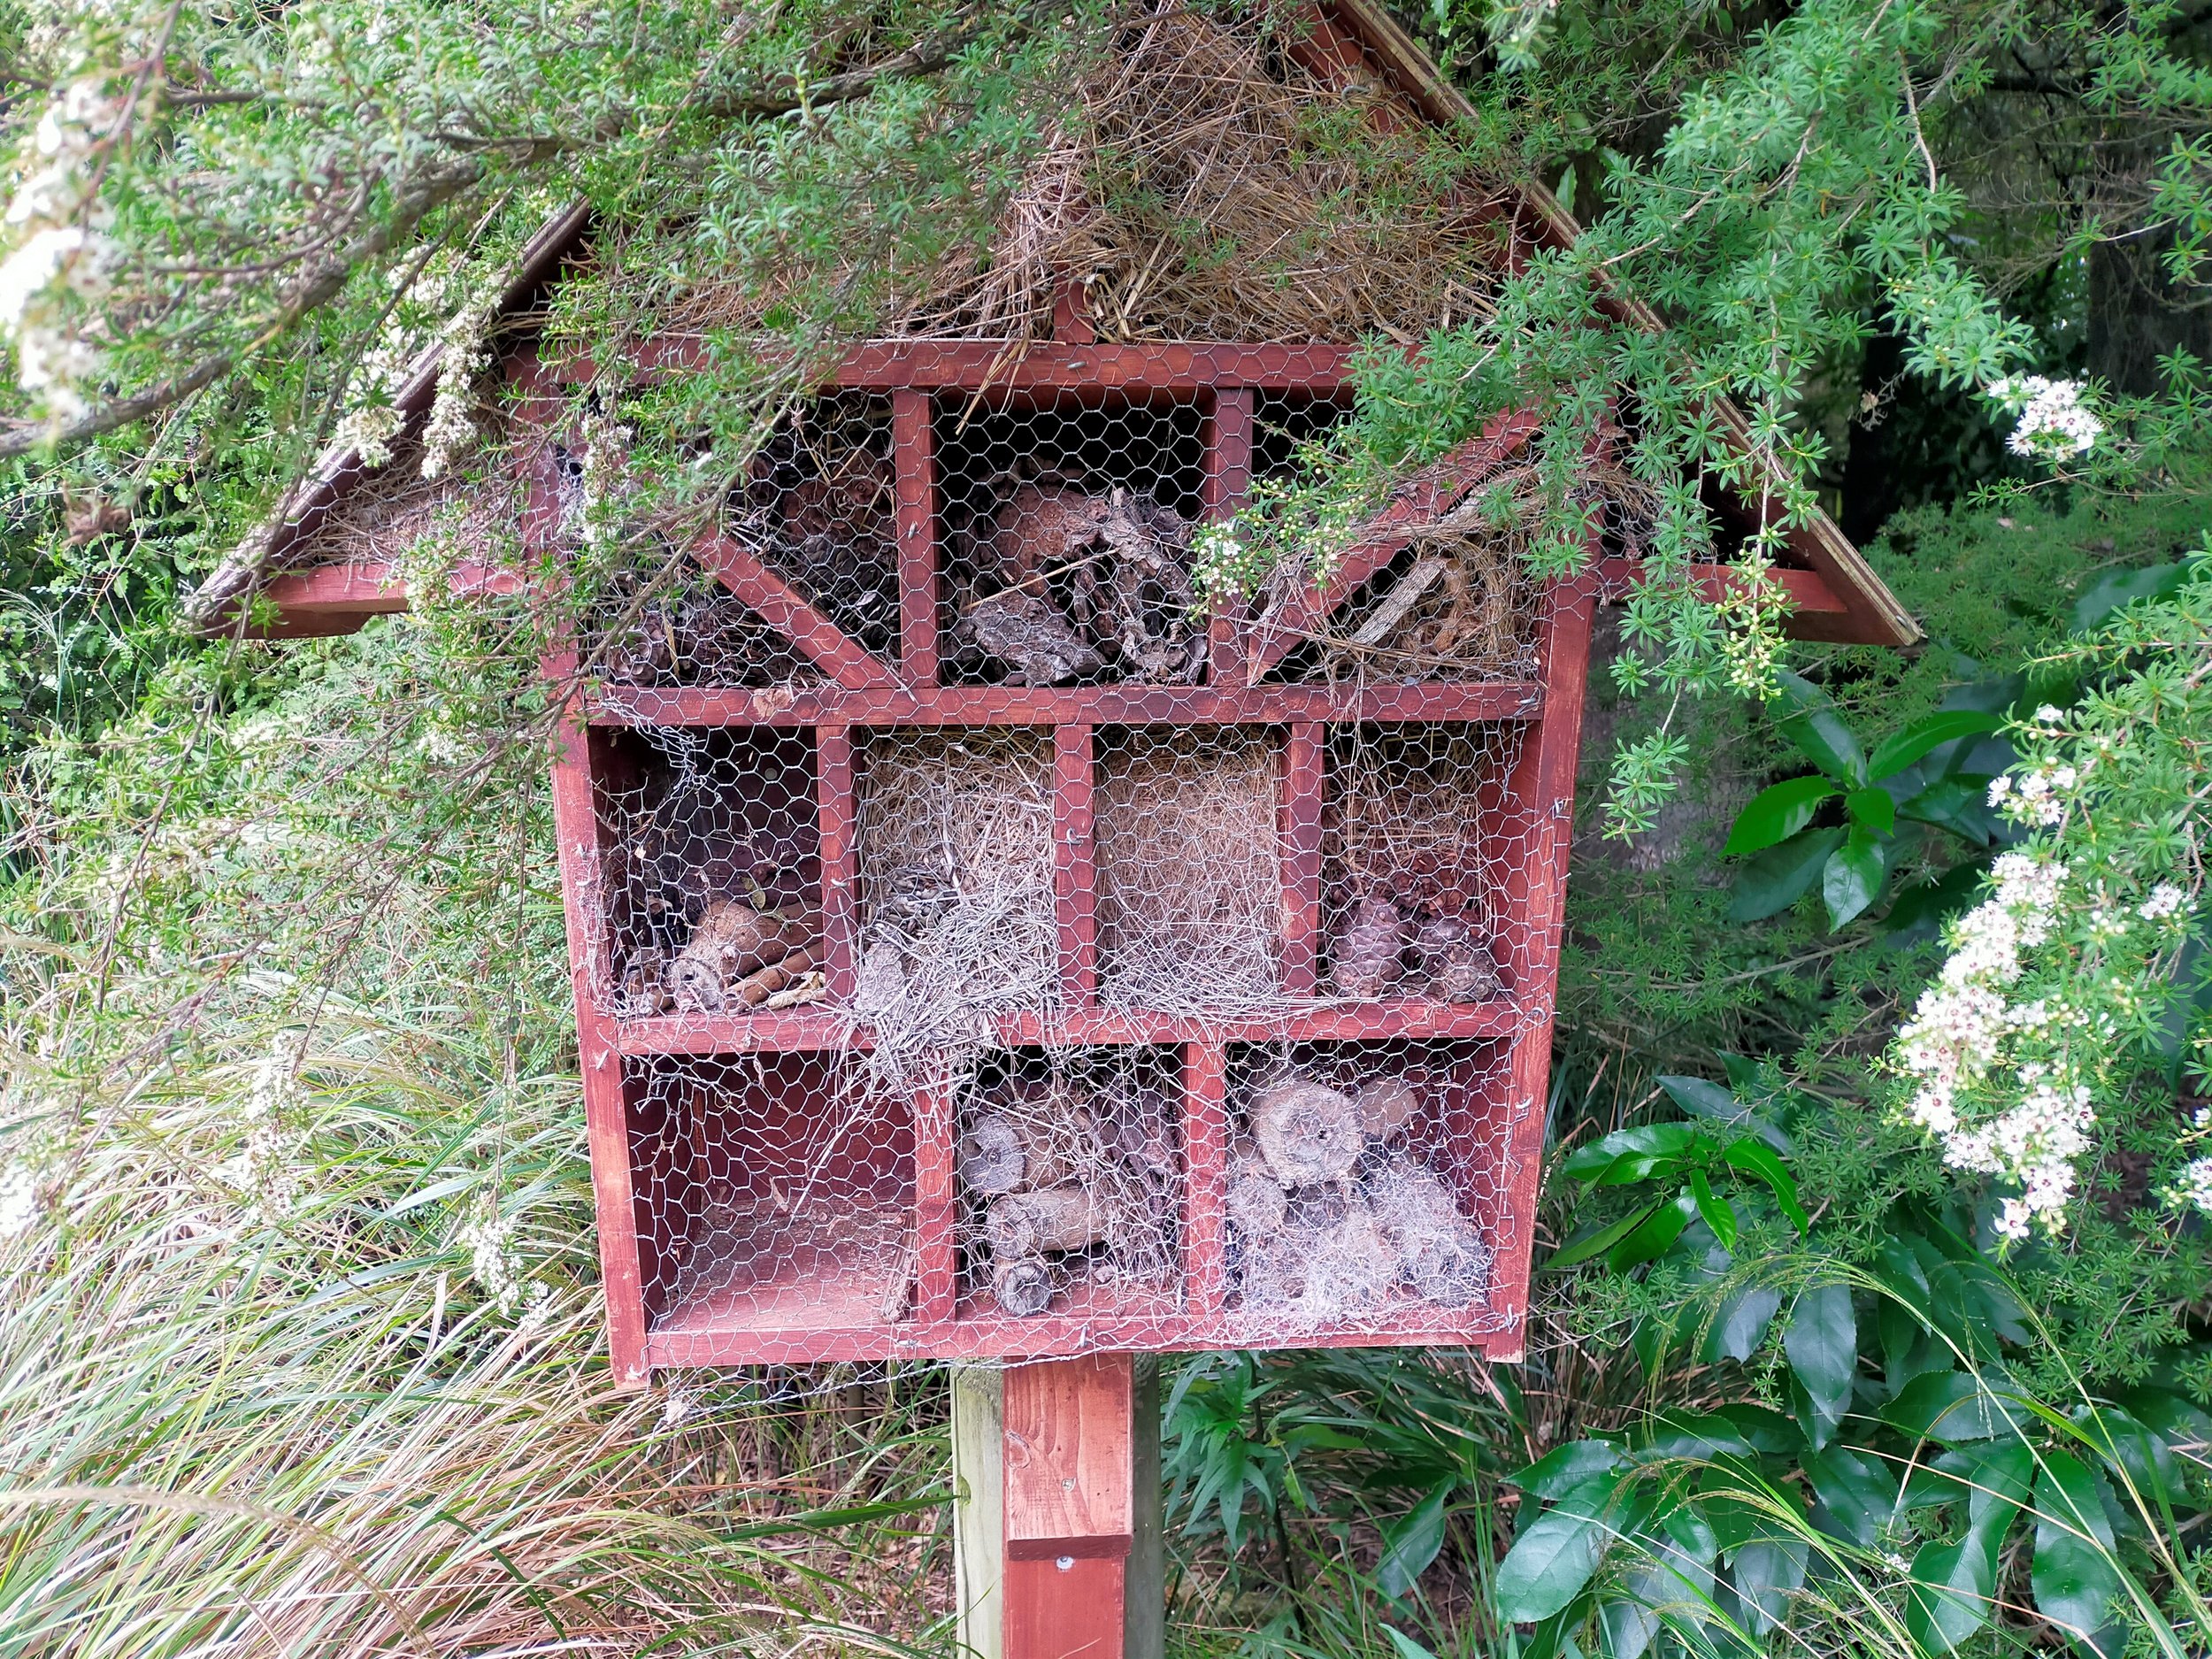 Insect hotel. Image by: Suzanne Middleton